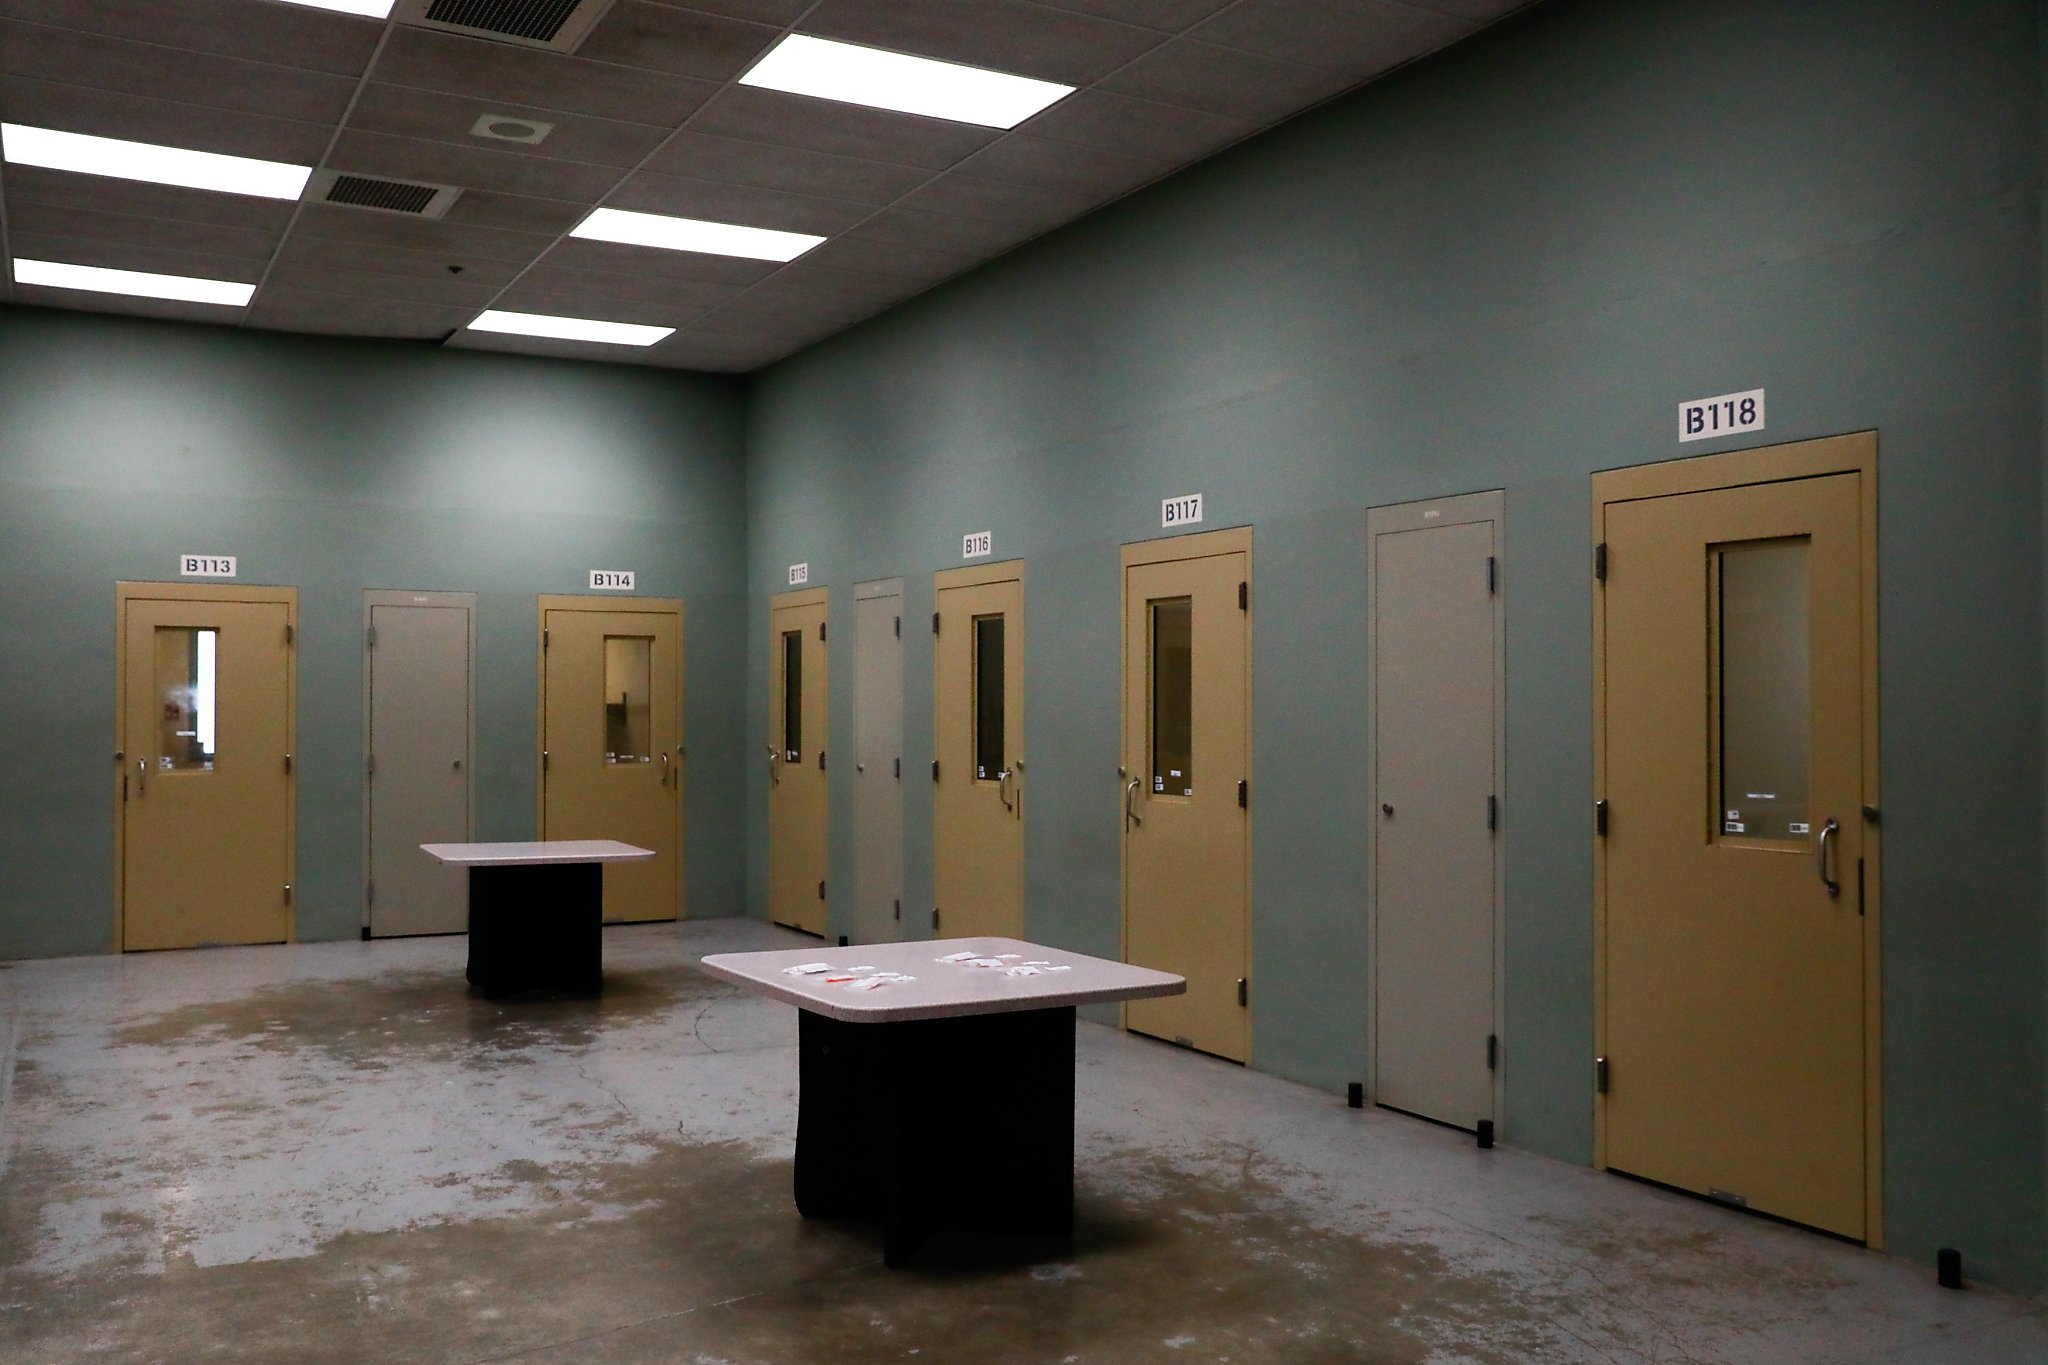 Locking up young people in juvenile hall tops 500,000 in some